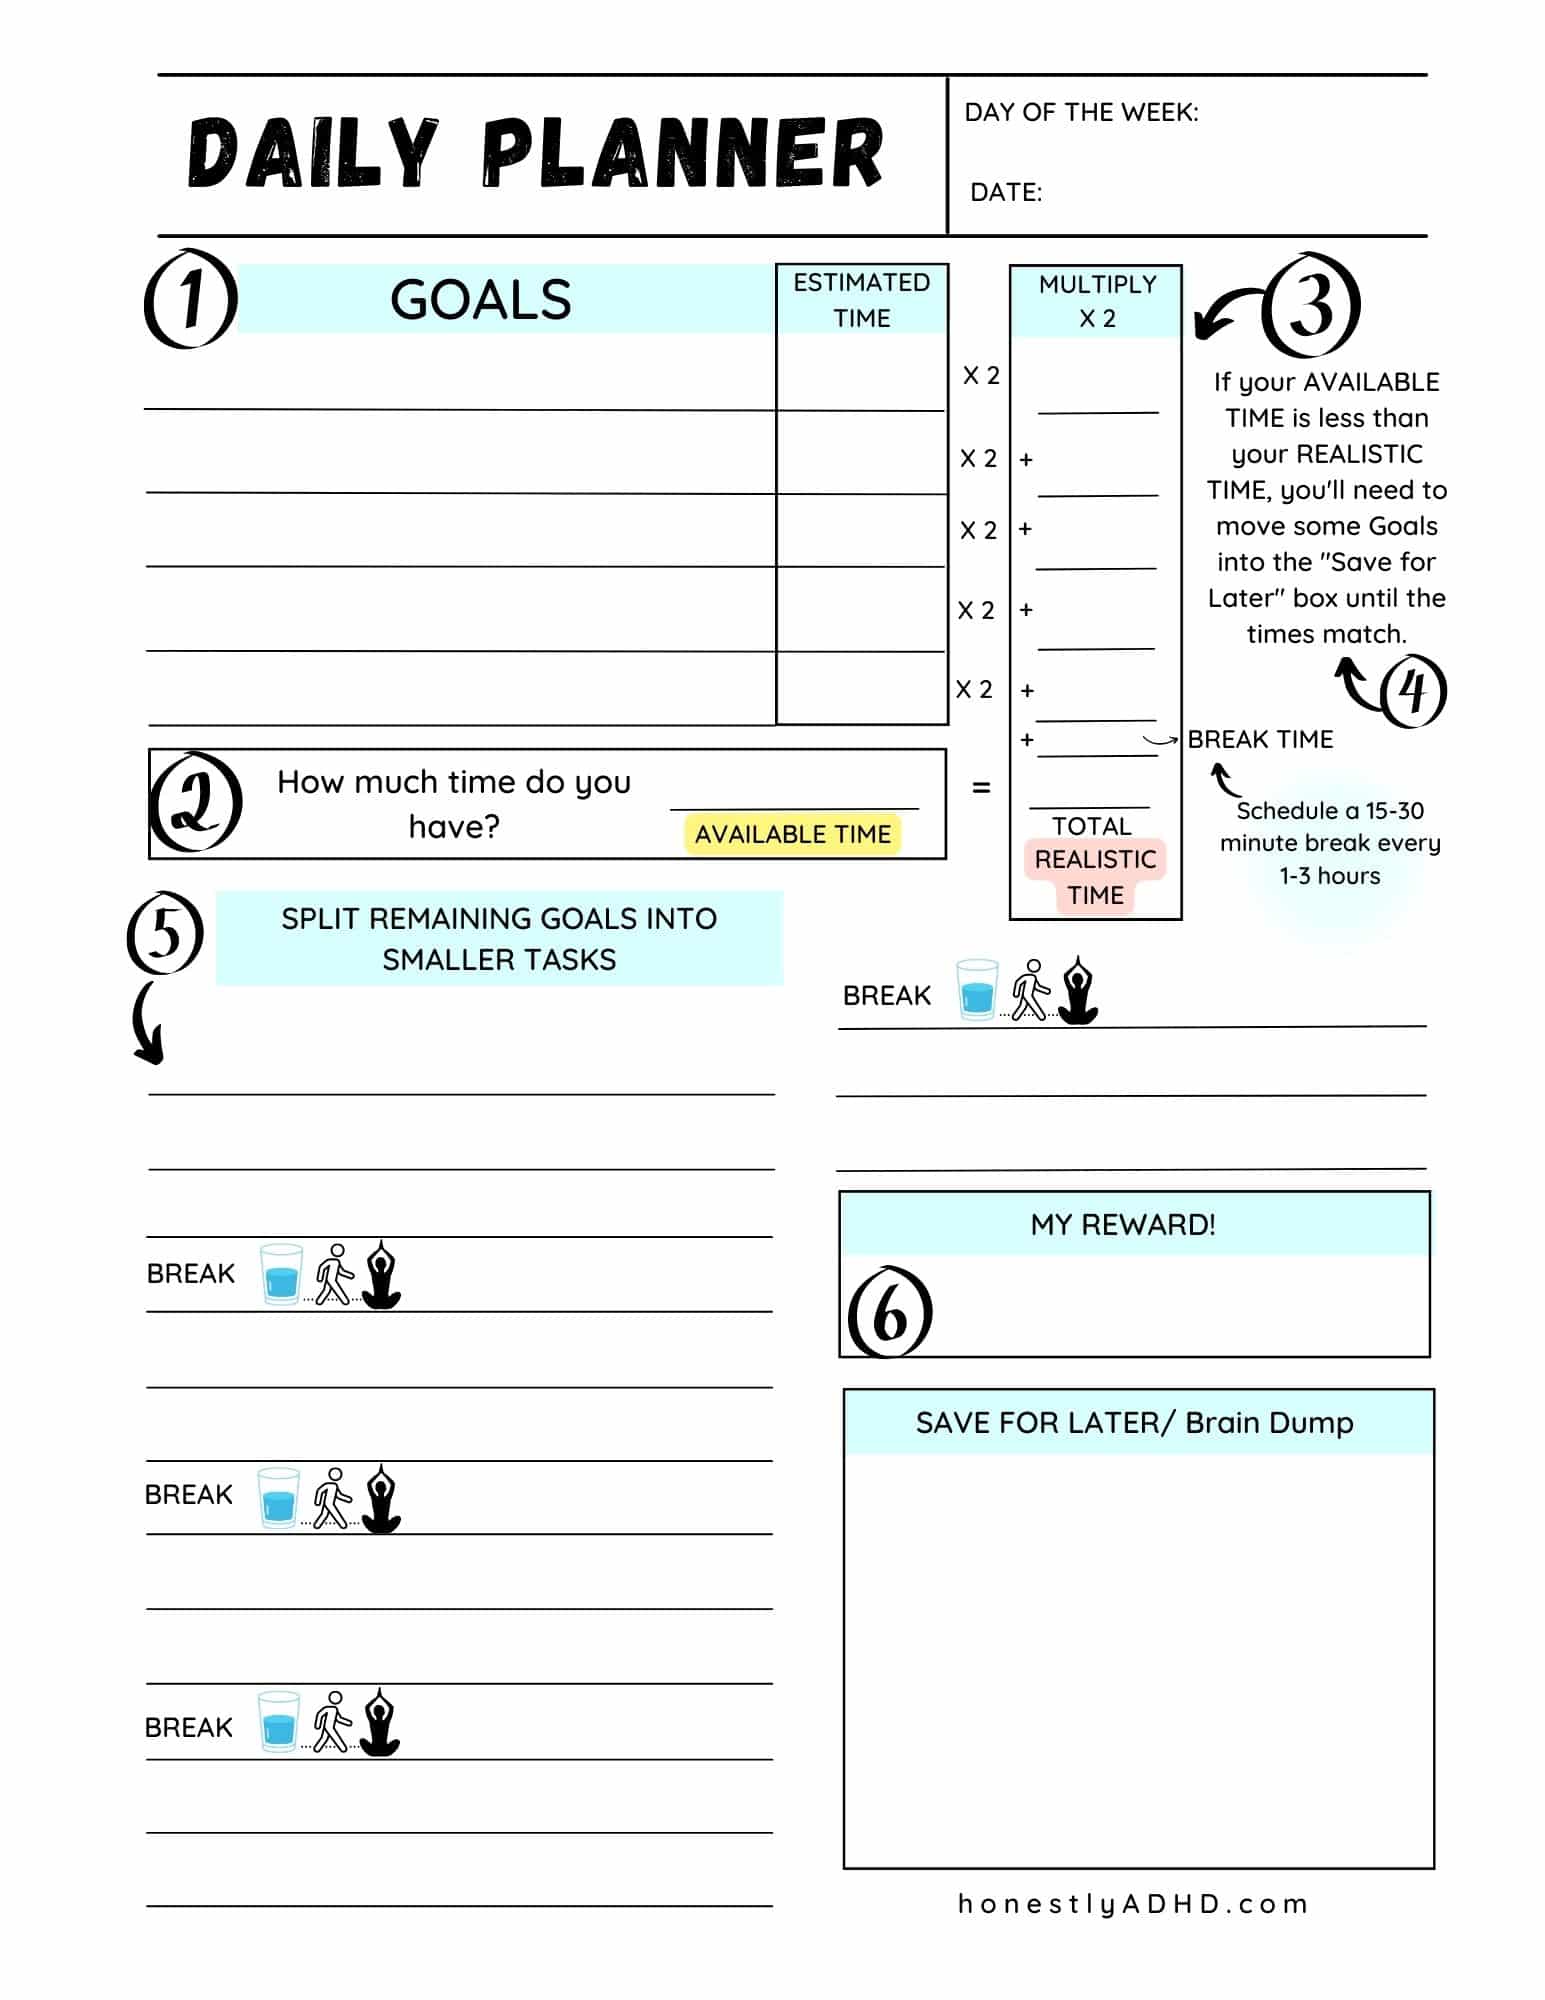 The daily adhd planner with a slot to create realistic time goals, scheduled breaks, a reward and brain dump section.